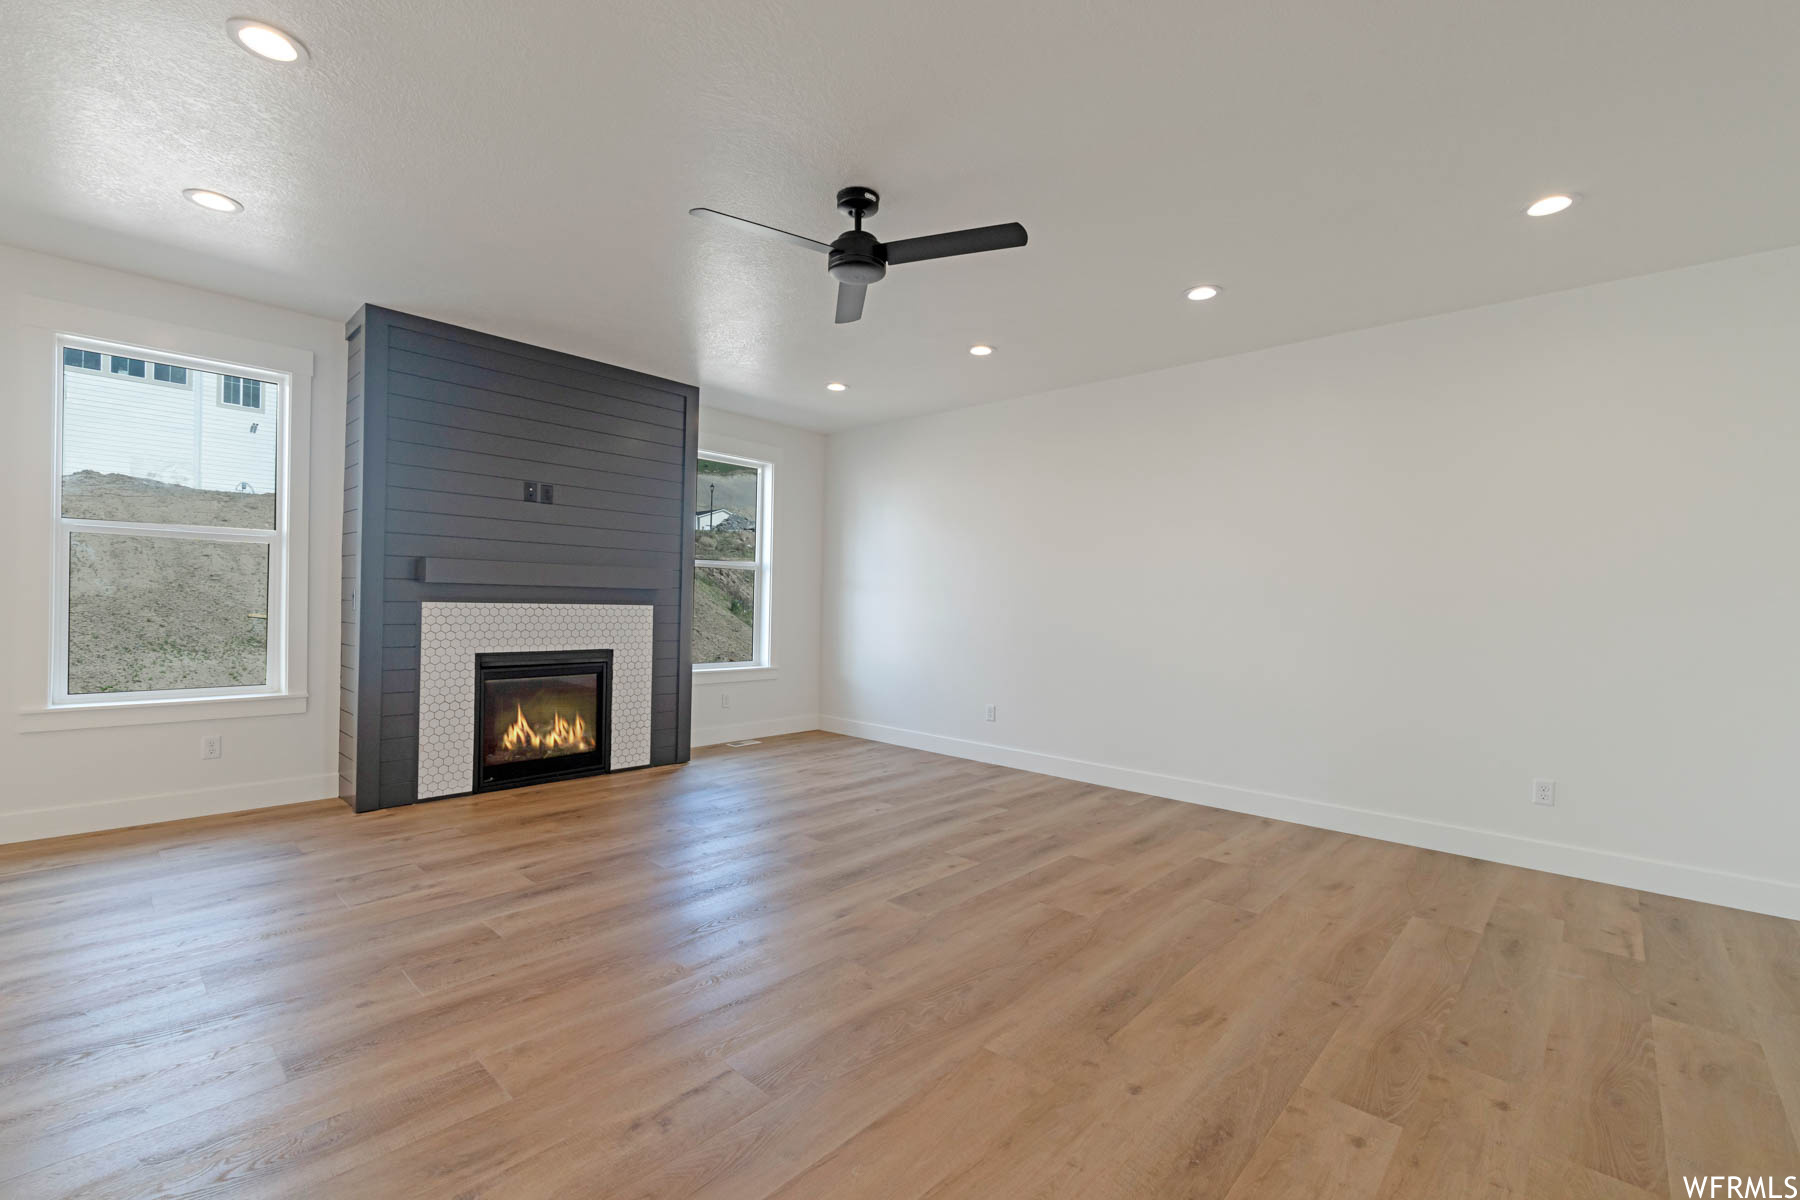 Living room with hardwood floors, natural light, a ceiling fan, and a fireplace